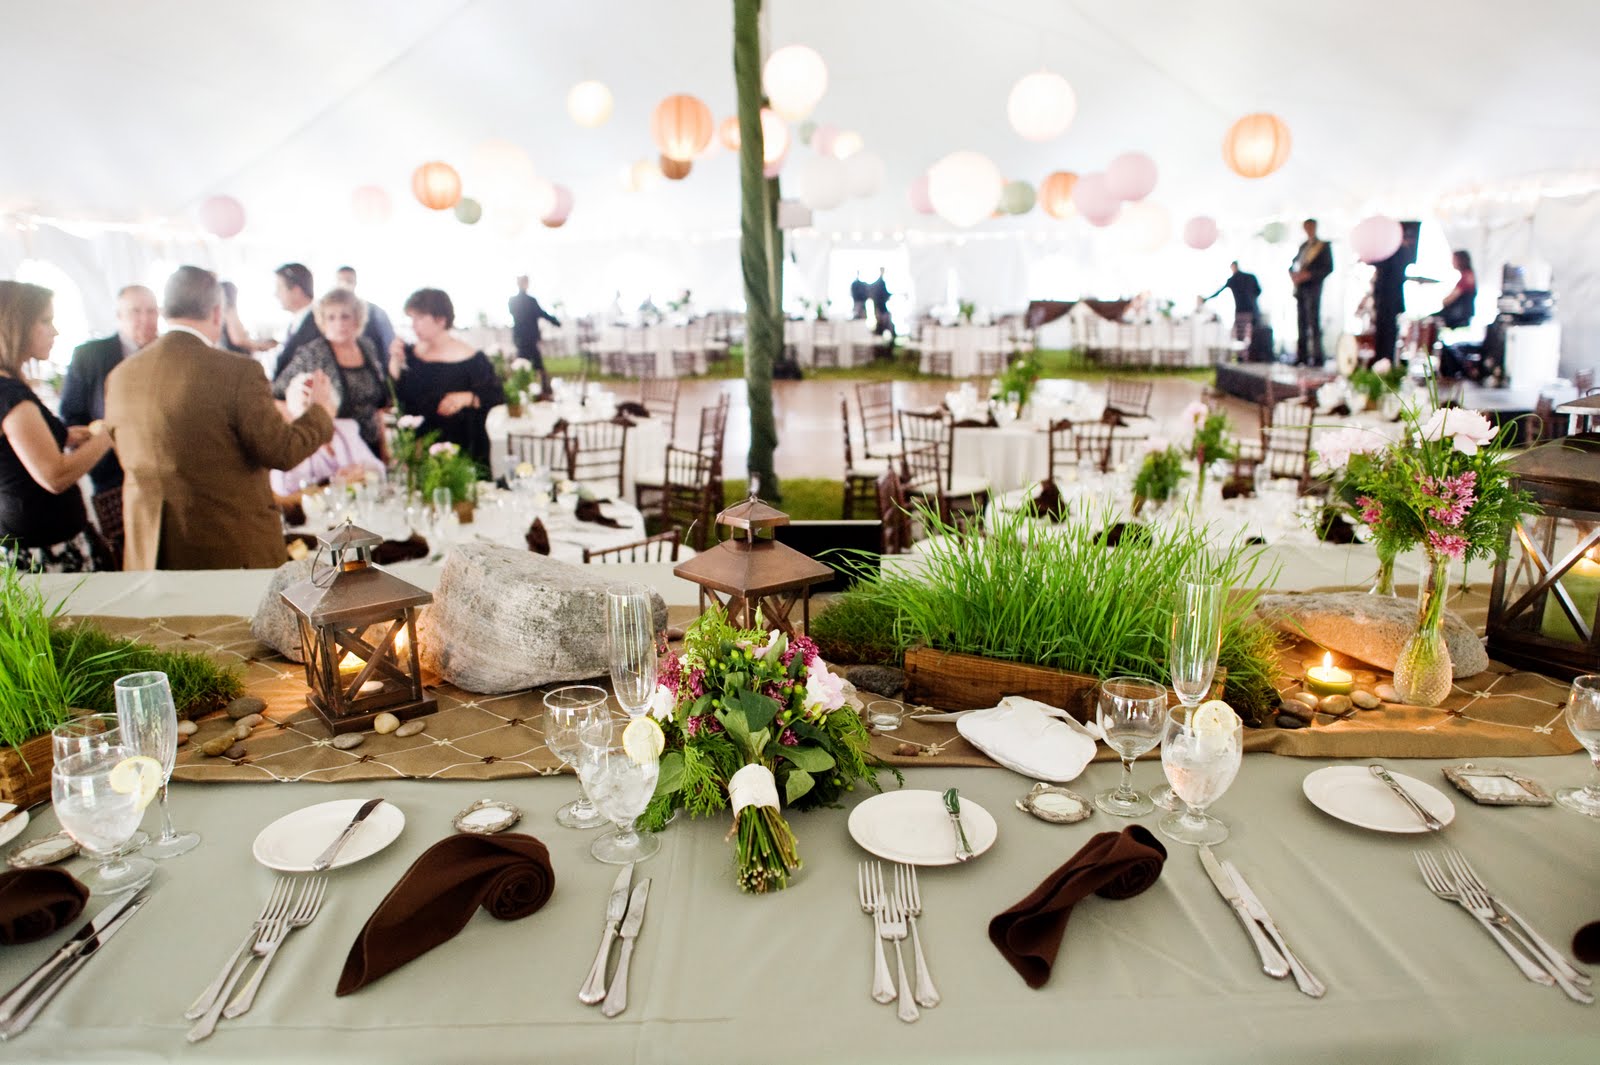 Wedding Linens - How to Best Dress Your Tables.